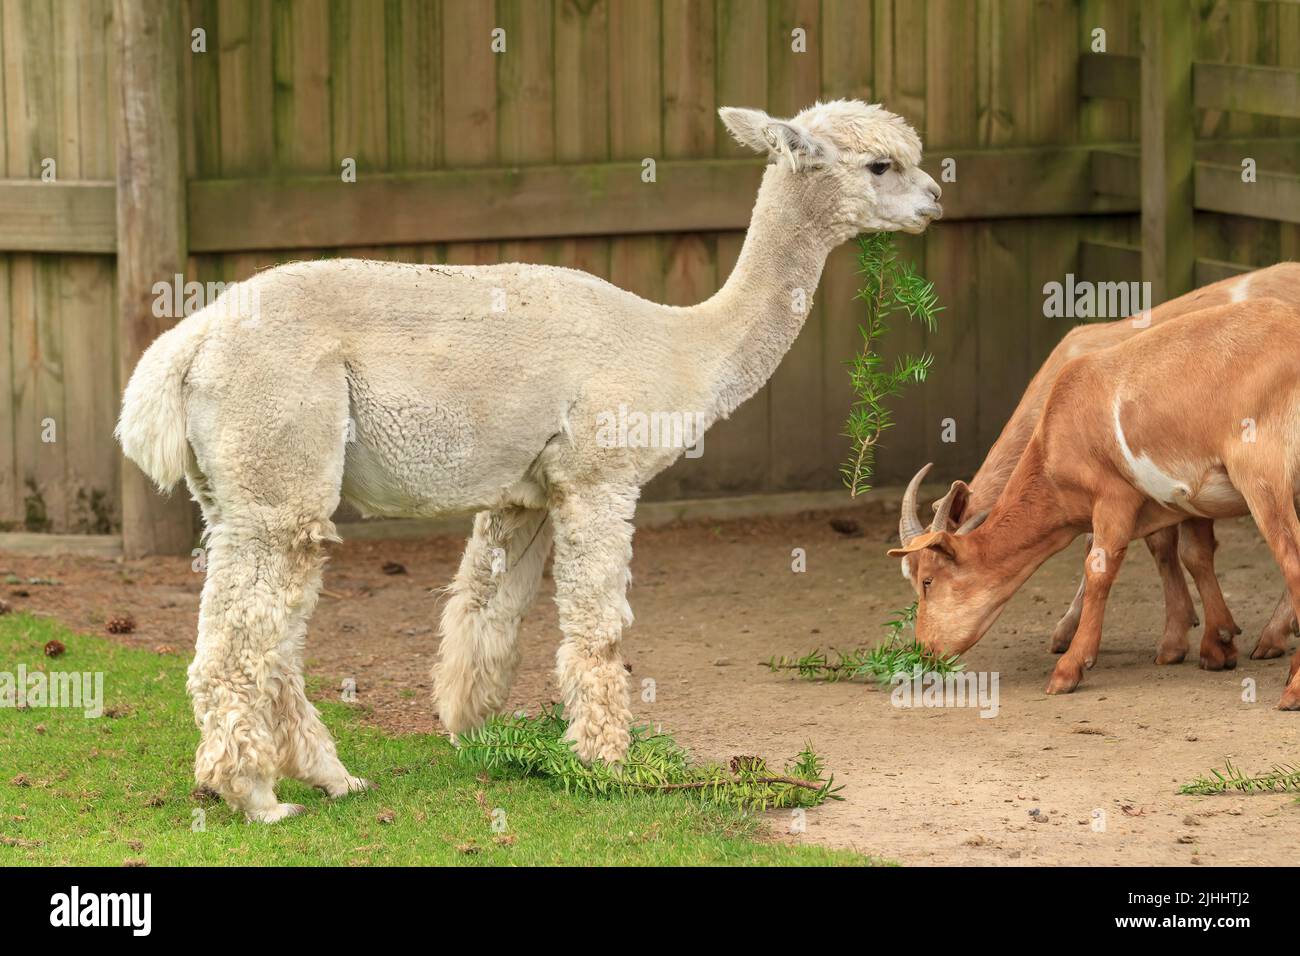 A young white alpaca eating leaves, with a pair of goats in the background Stock Photo